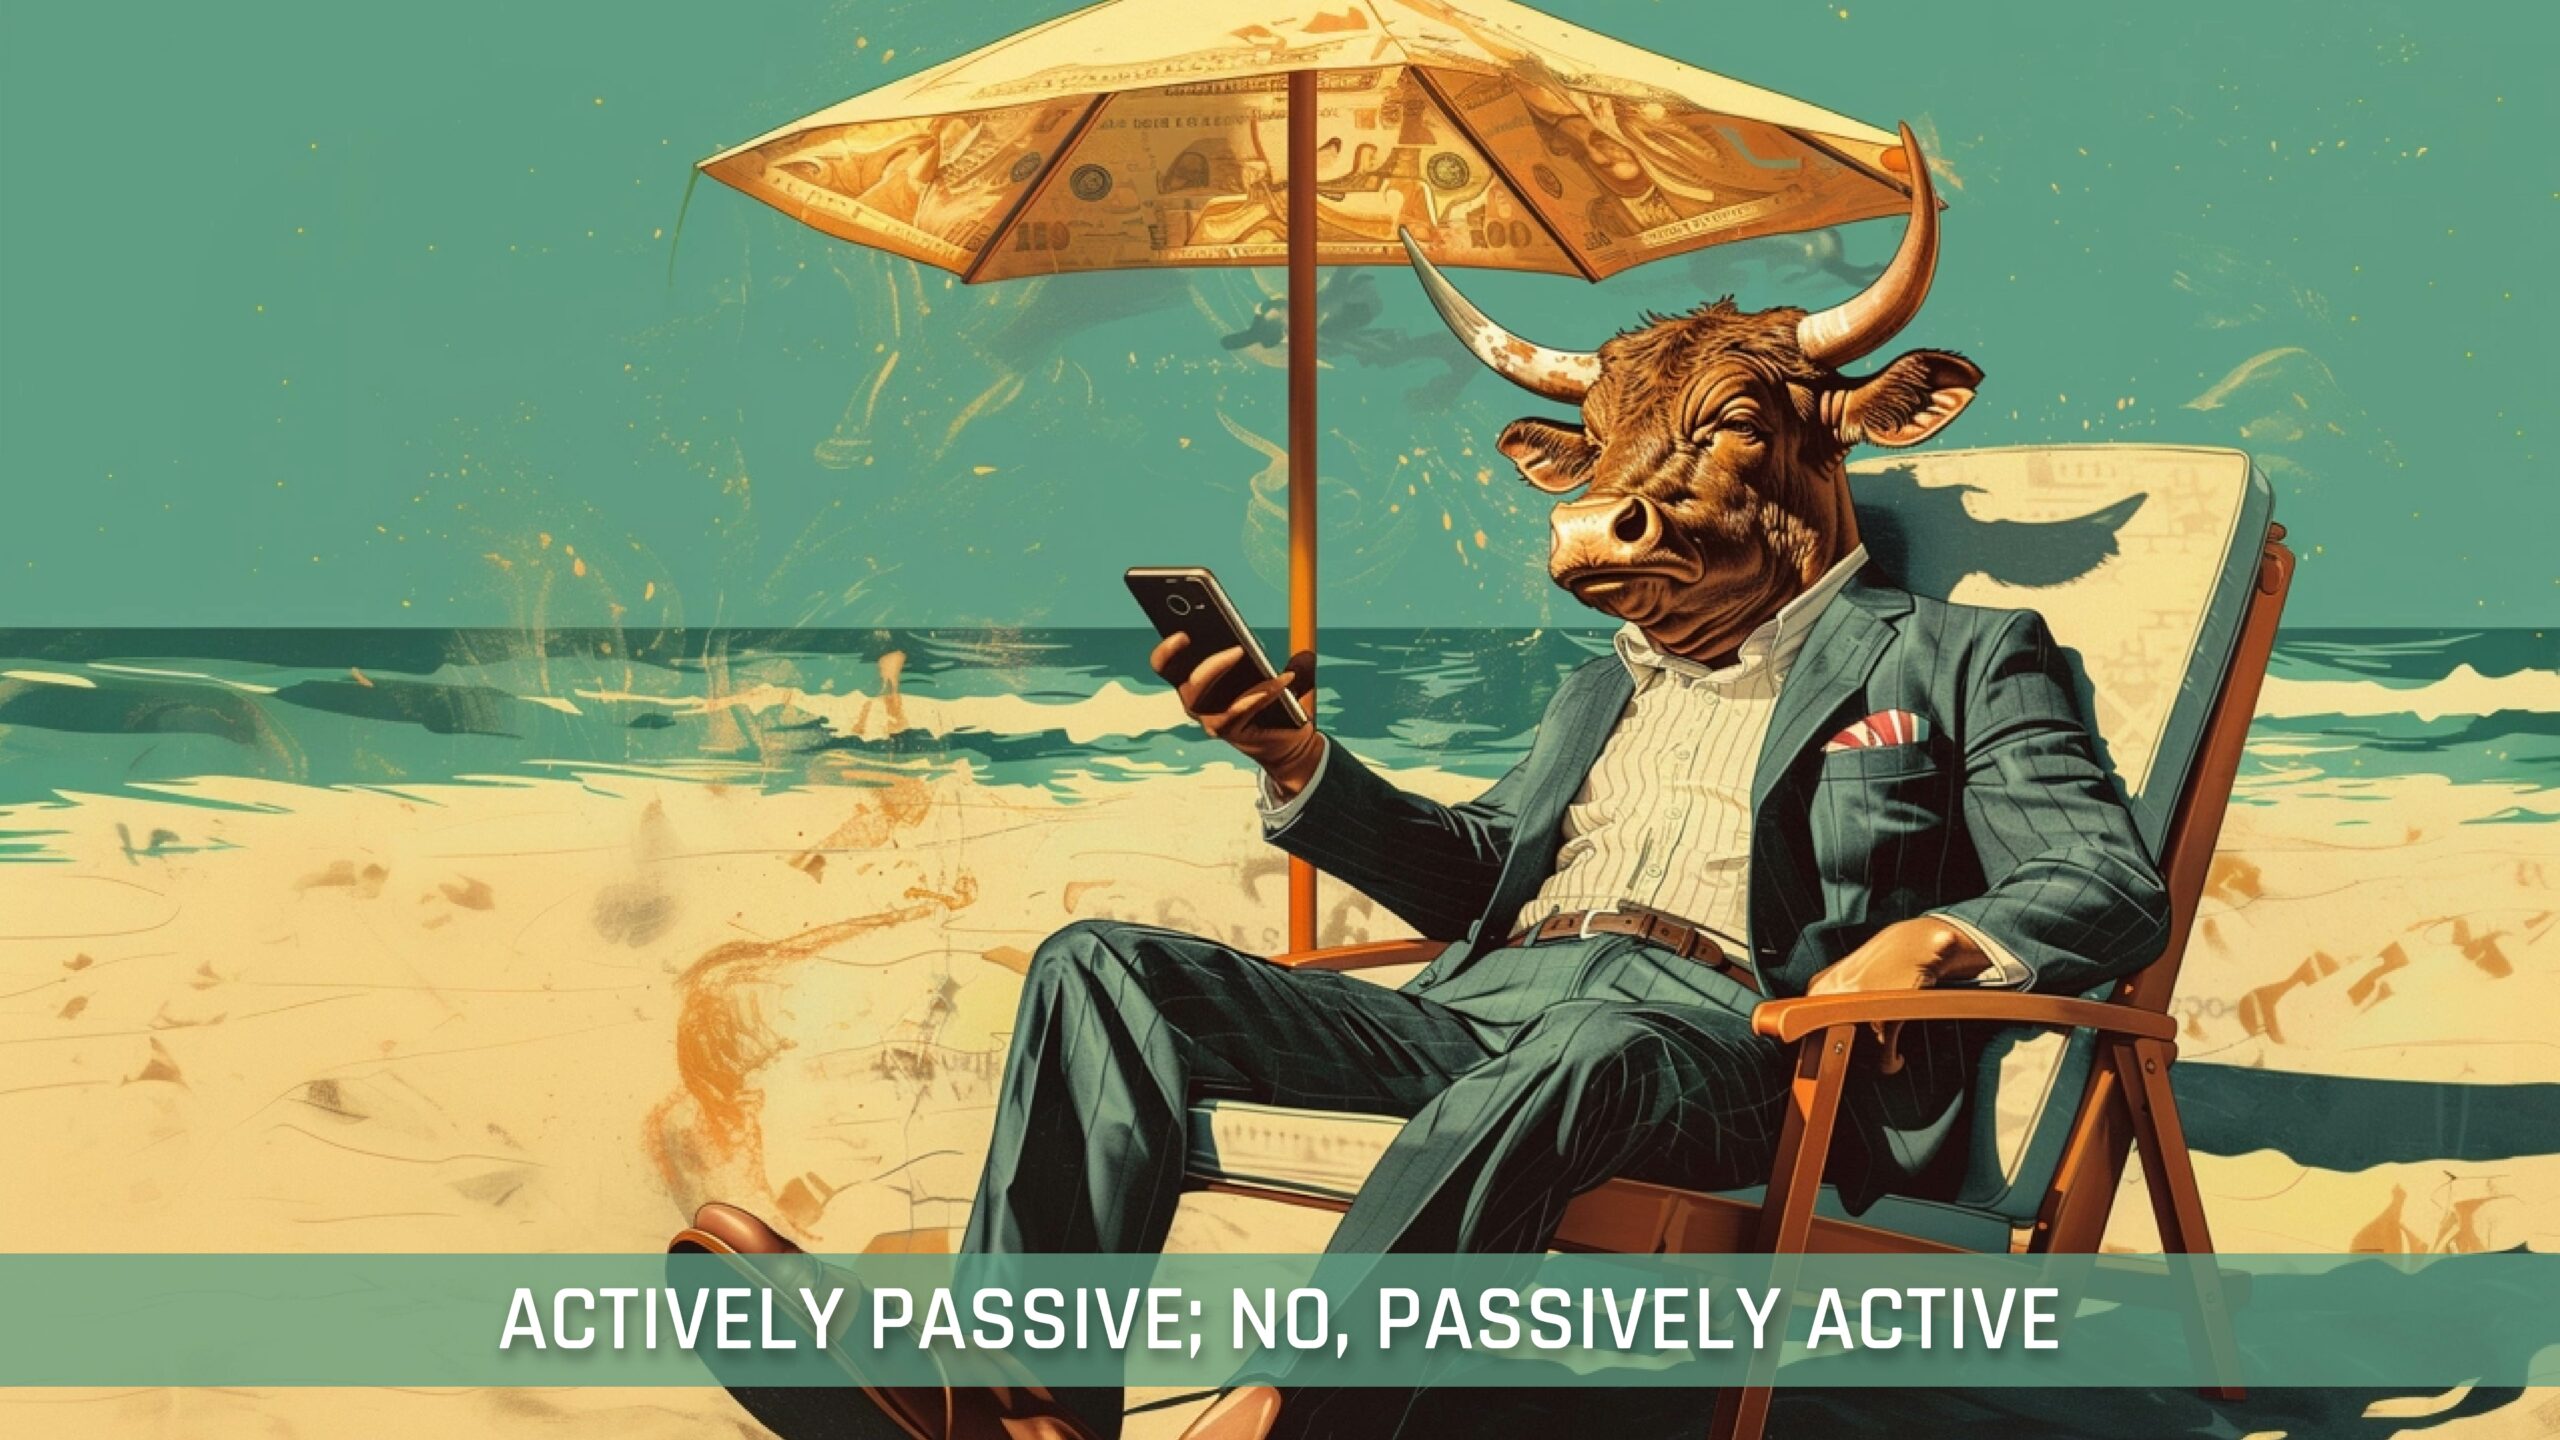 Actively Passive; No, Passively Active